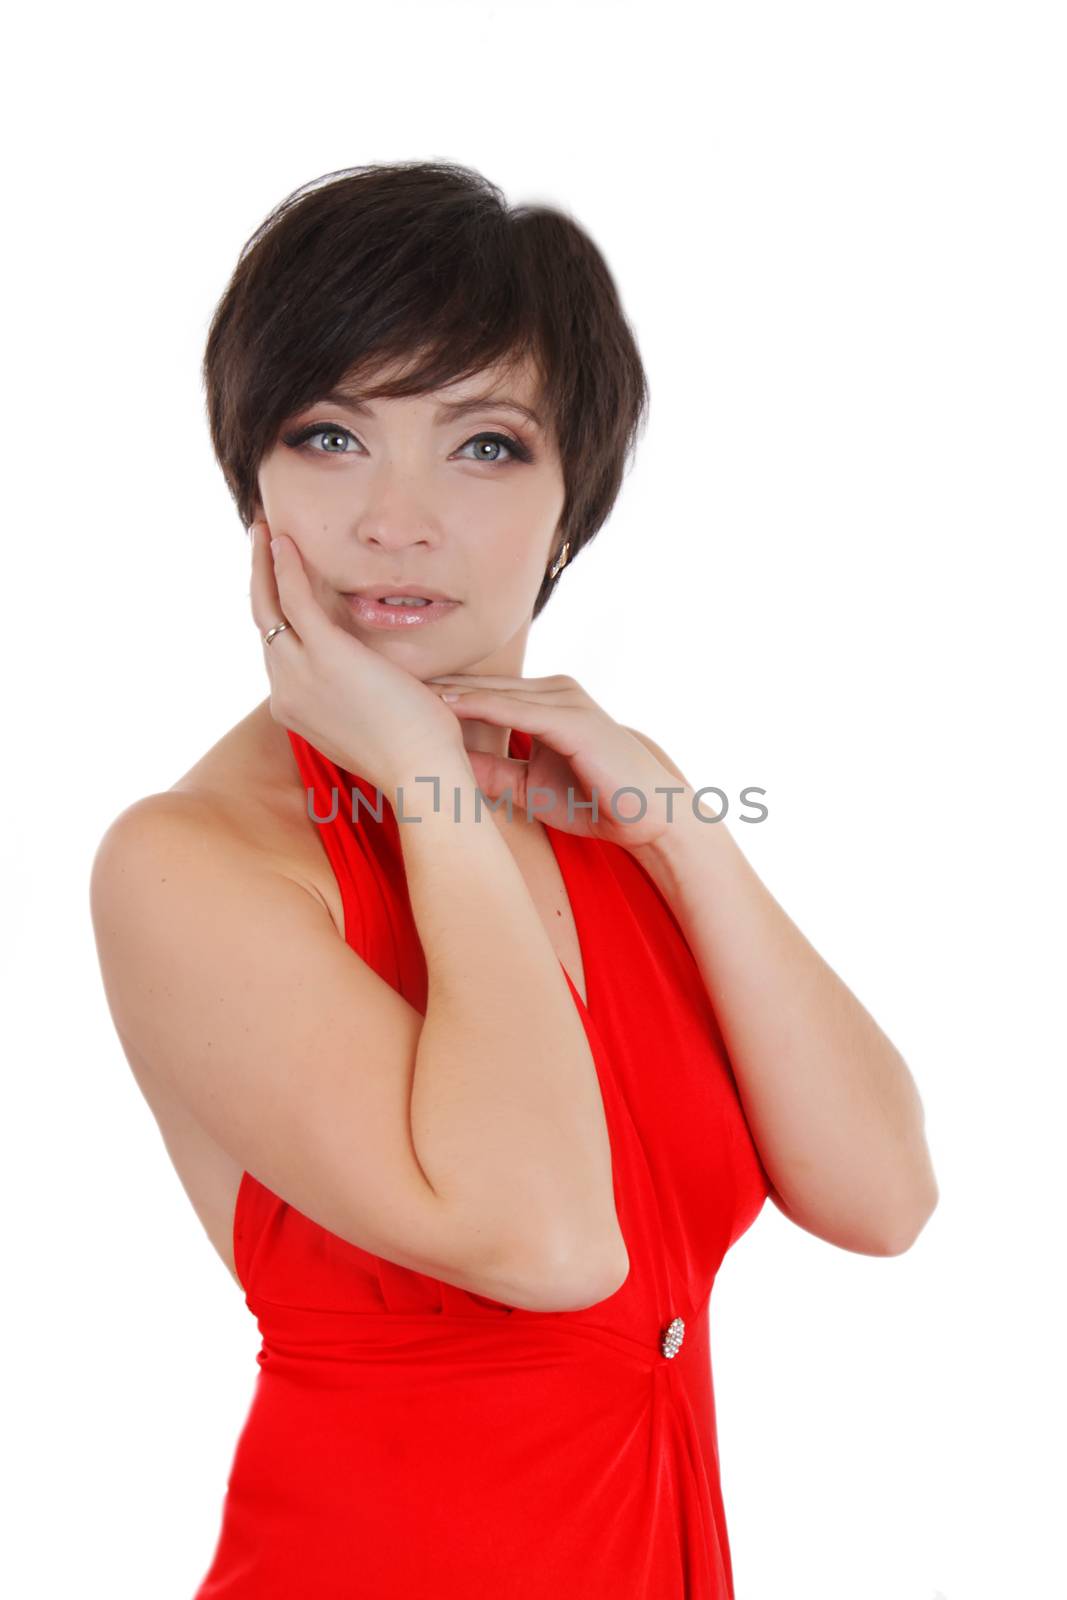 Elegant woman in red dress and make-up by Angel_a